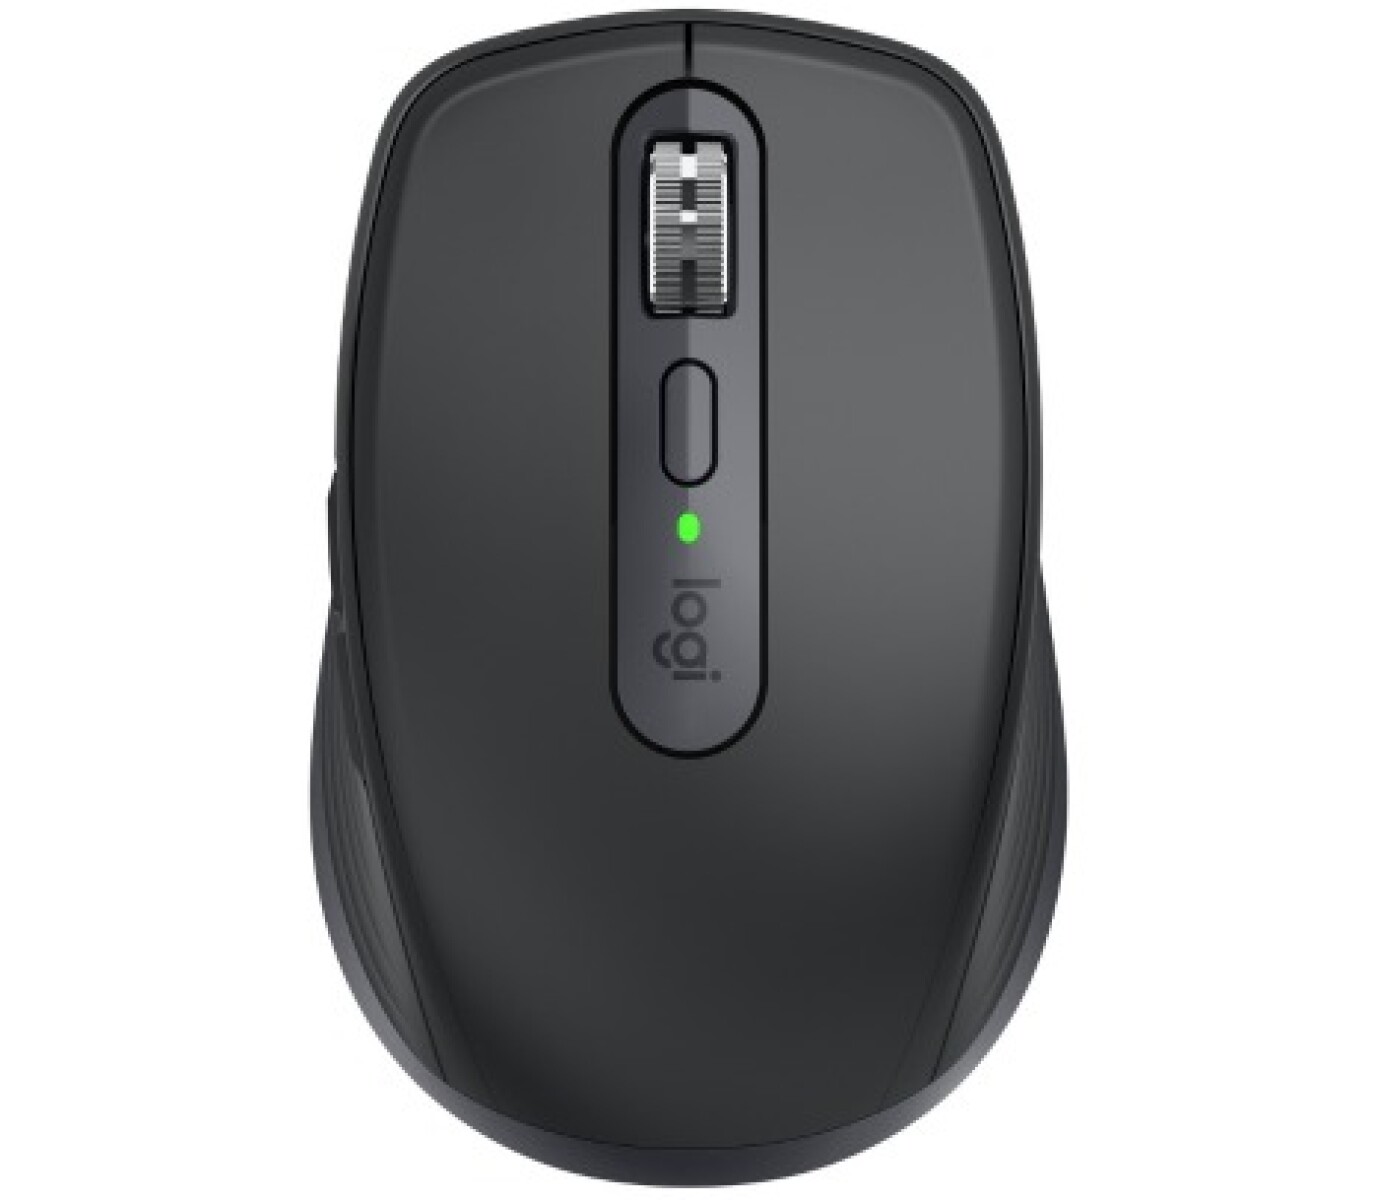 LOGITECH 910-006932 MOUSE MX ANYWHERE 3S GRAPHITE INAL+BT - Logitech 910-006932 Mouse Mx Anywhere 3s Graphite Inal+bt 